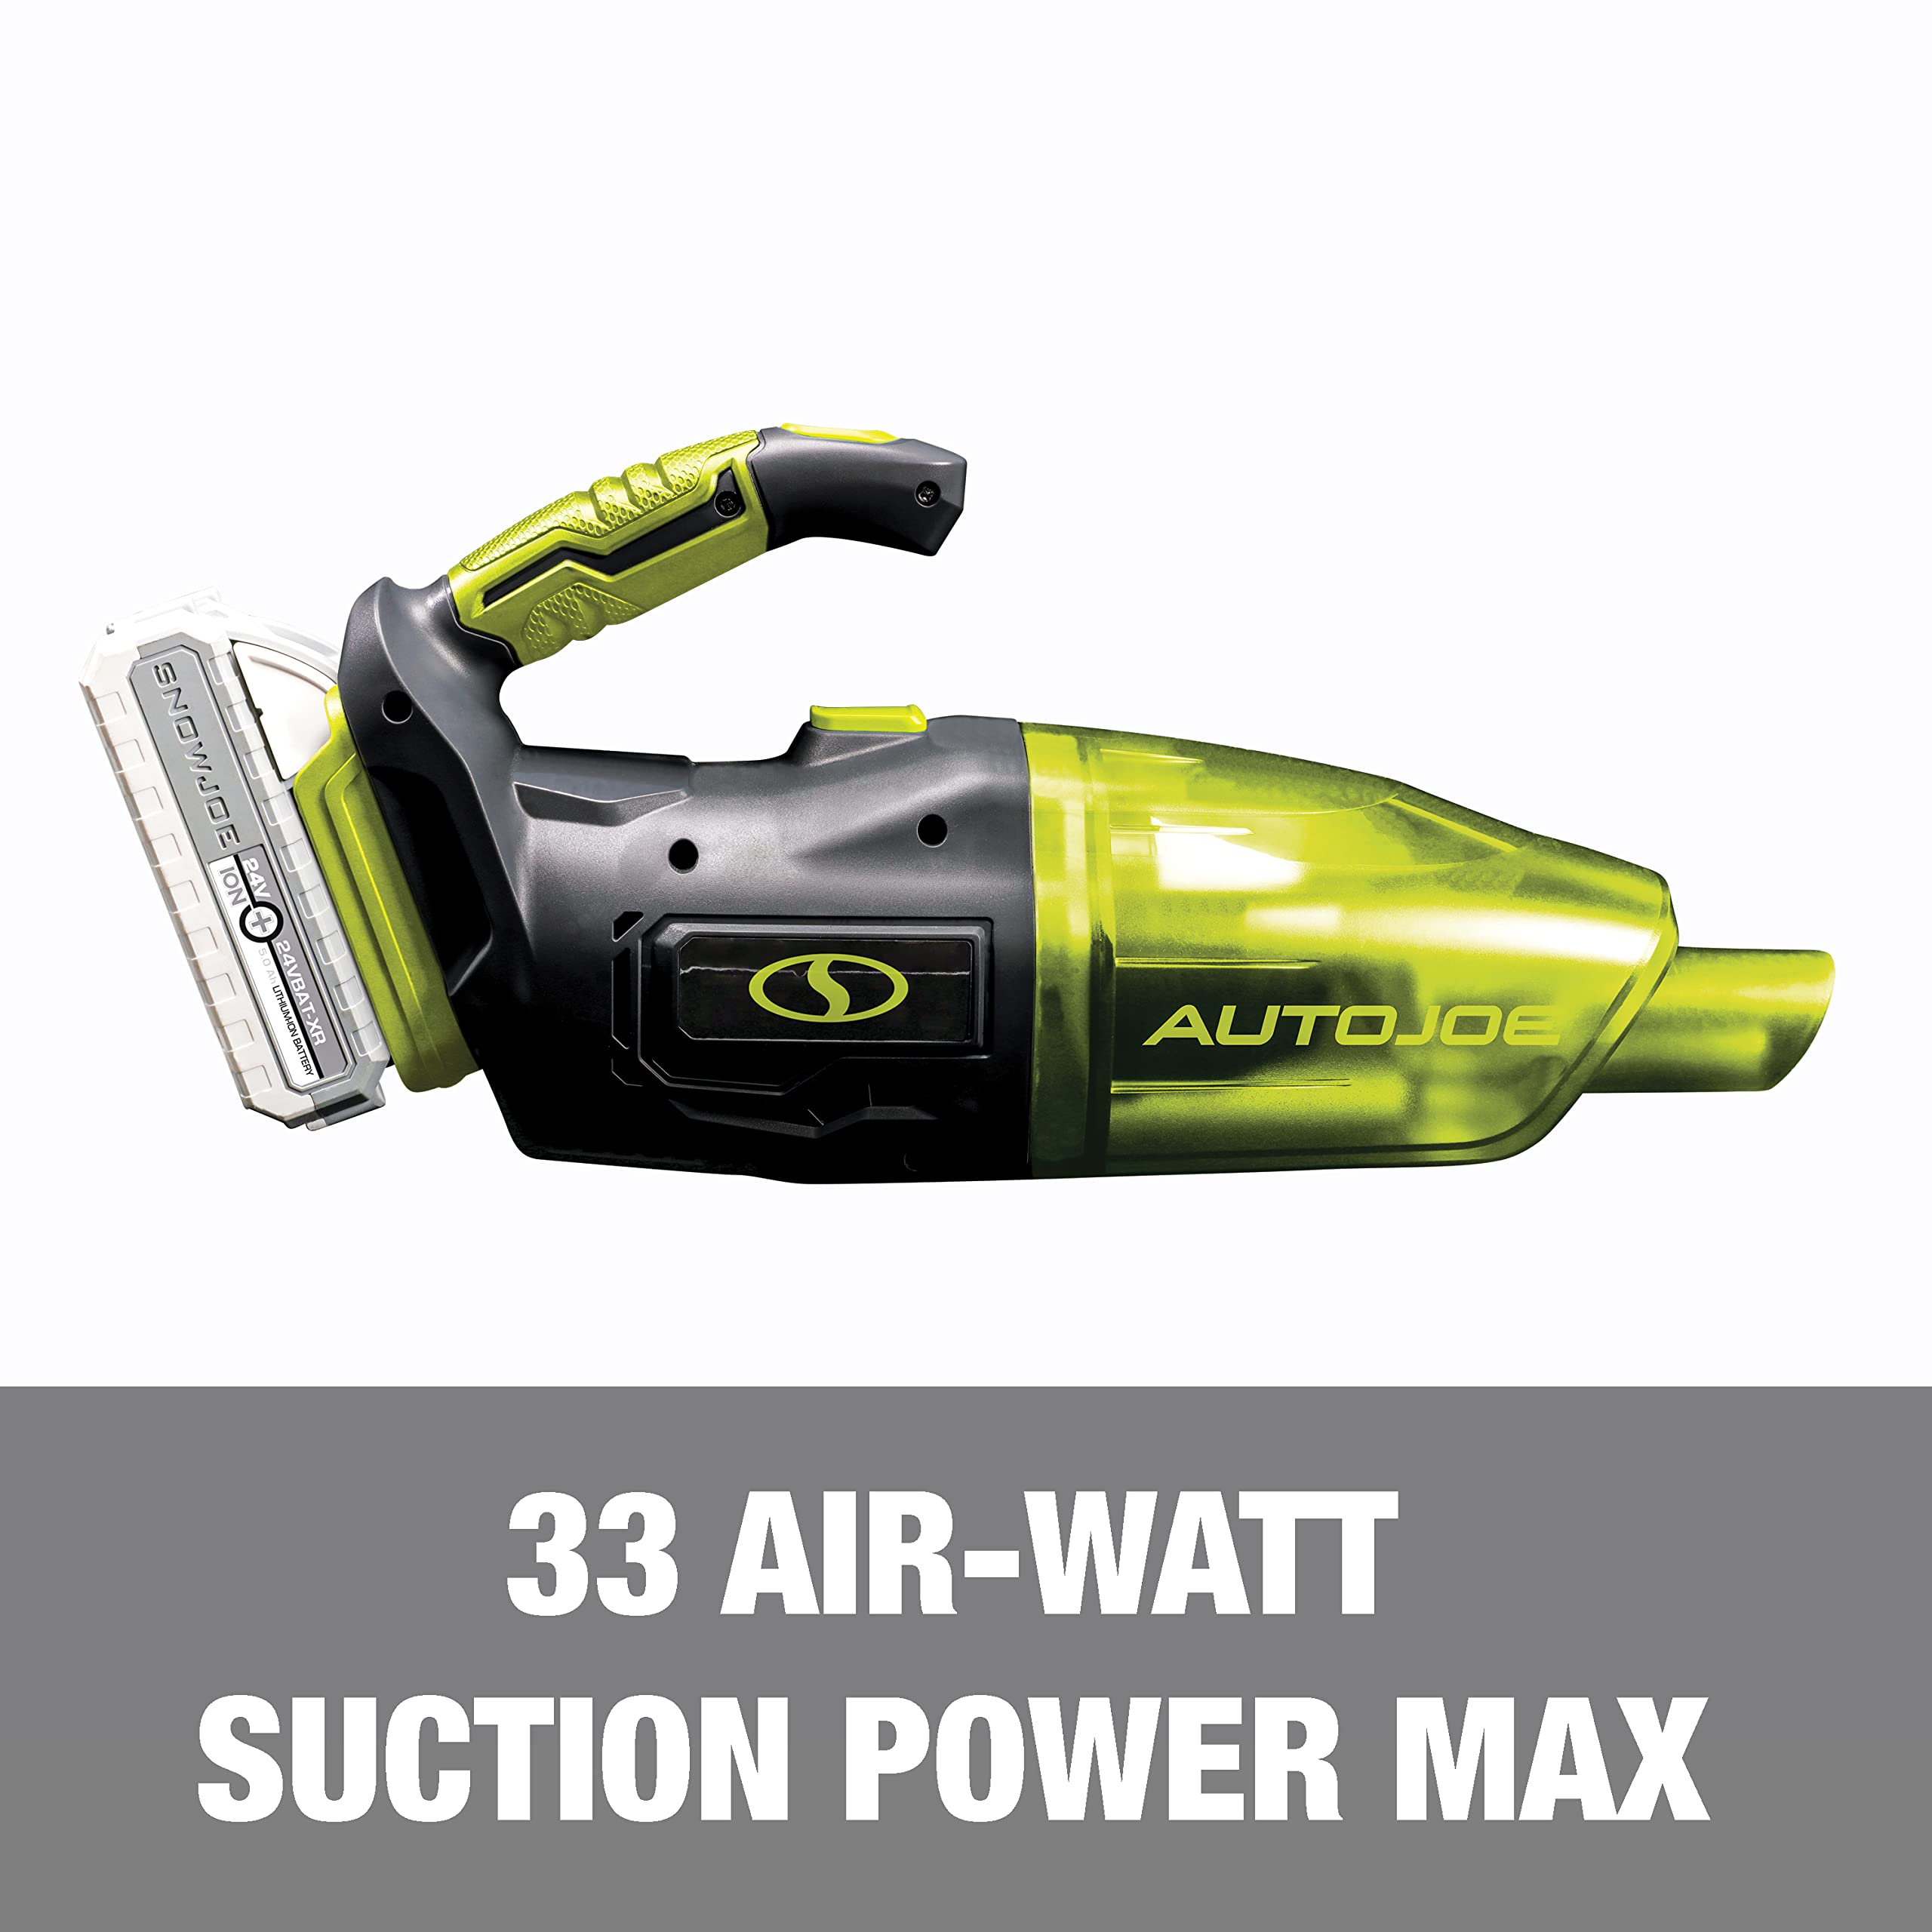 Auto Joe AJVAC-P1 24V Cordless Wet/Dry Handheld Vacuum w/5 Attachments, Bag, Kit (w/ 2-Ah Battery and Charger), Green